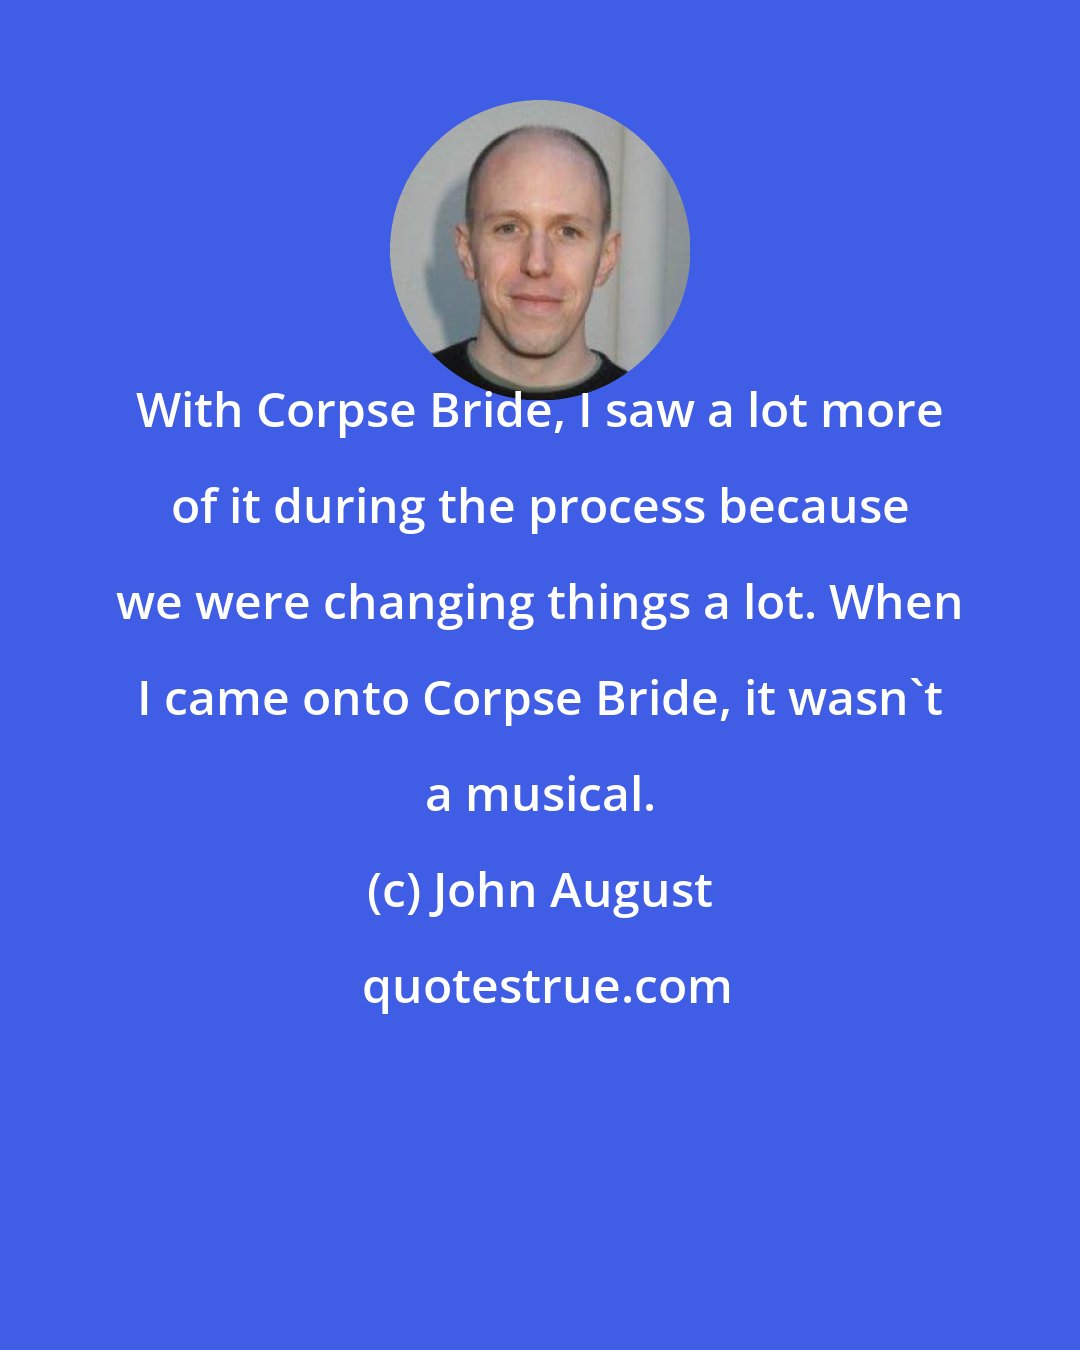 John August: With Corpse Bride, I saw a lot more of it during the process because we were changing things a lot. When I came onto Corpse Bride, it wasn't a musical.